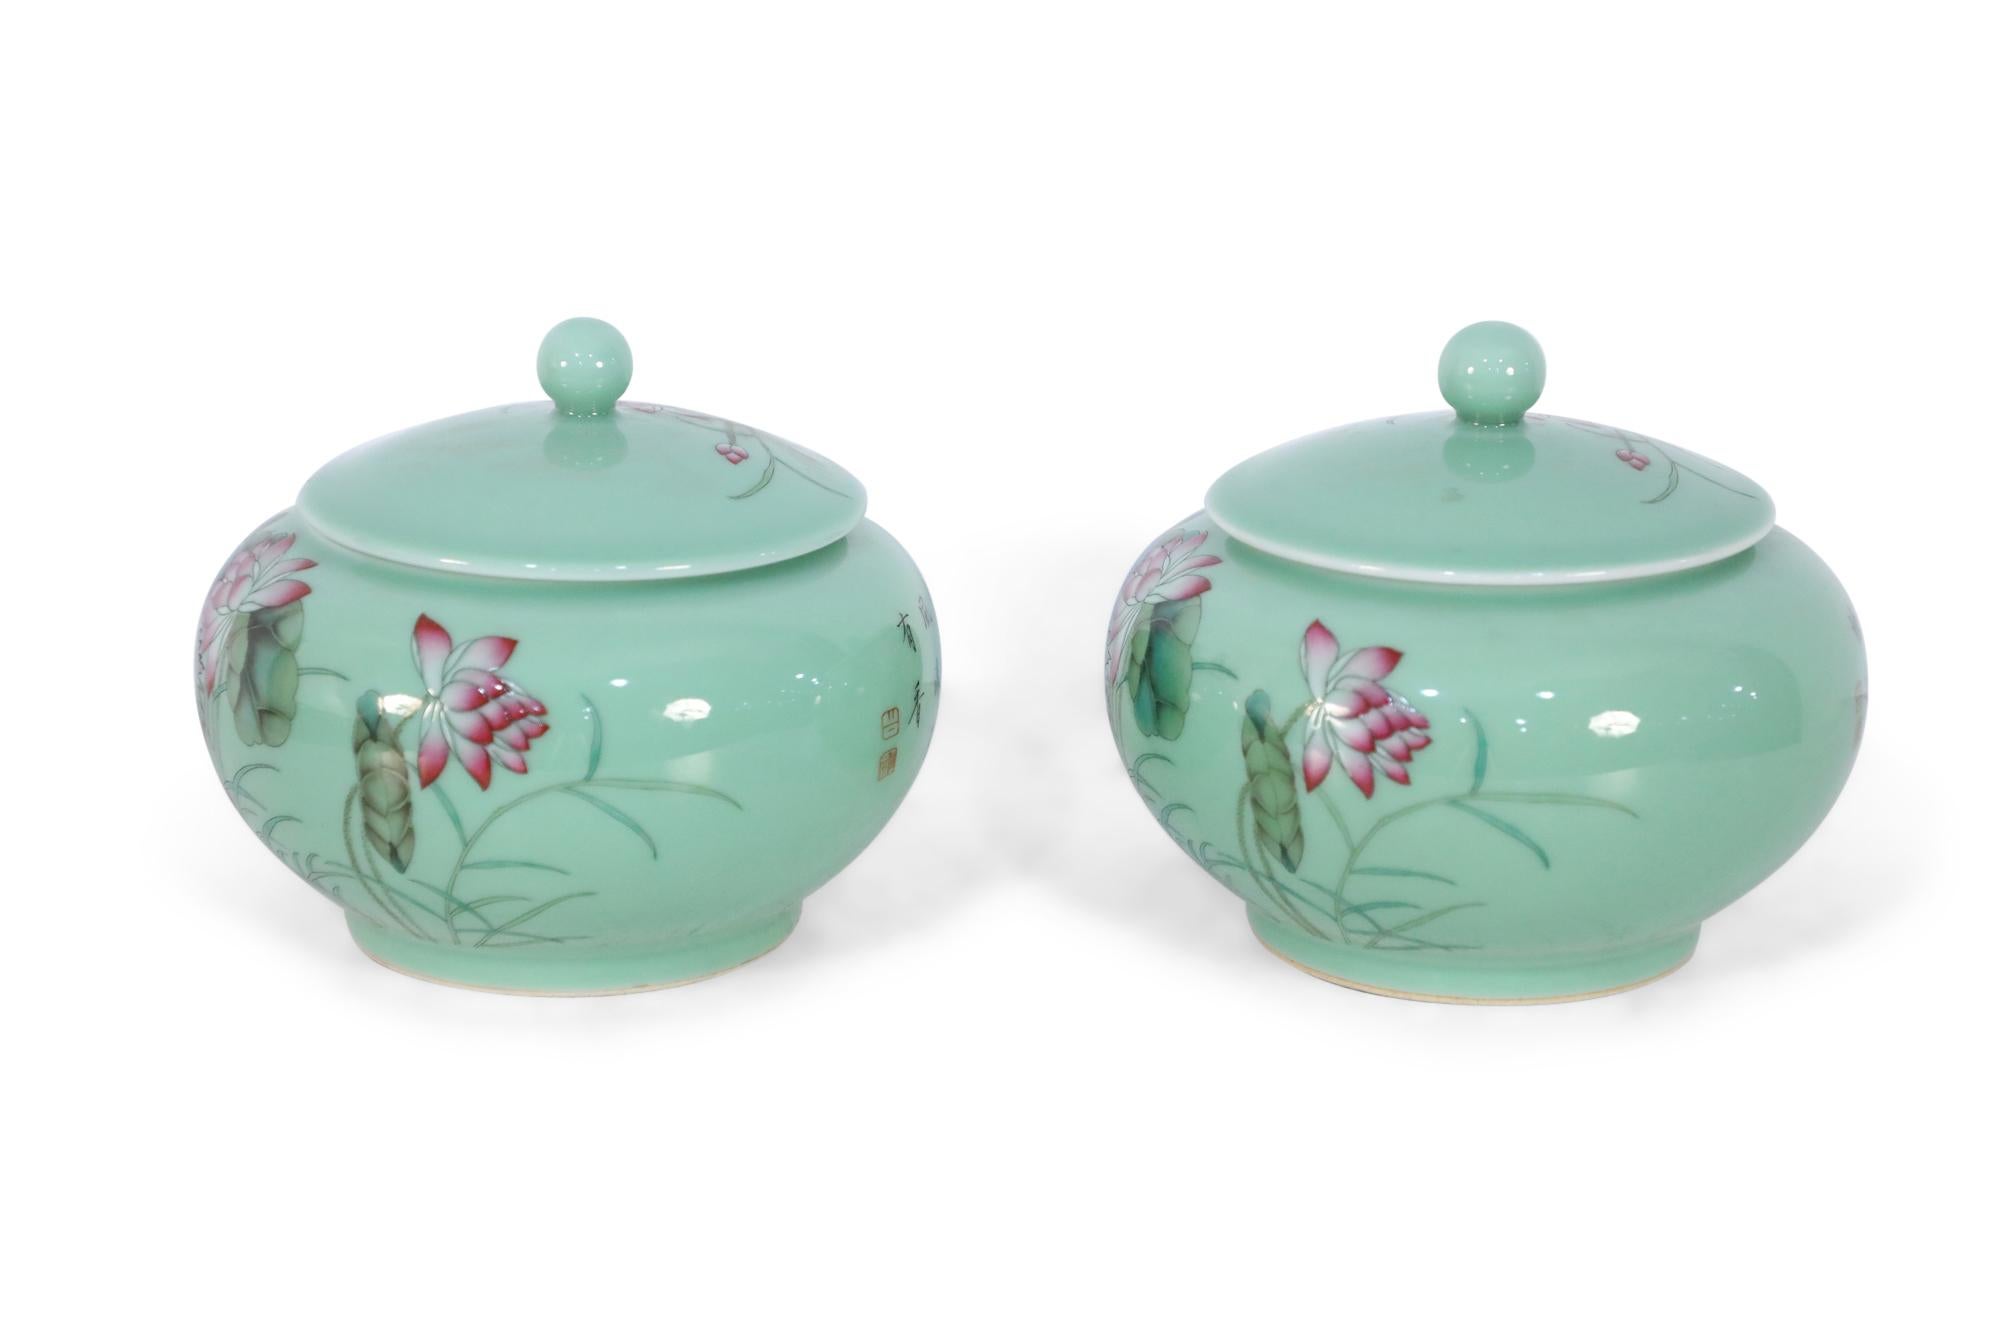 Pair of Chinese pale green lidded jars decorated with lily pads and pink lotus blossoms on one side of their round forms and extending up to the lids, and characters on the reverse sides (date mark on bottom, see photos).